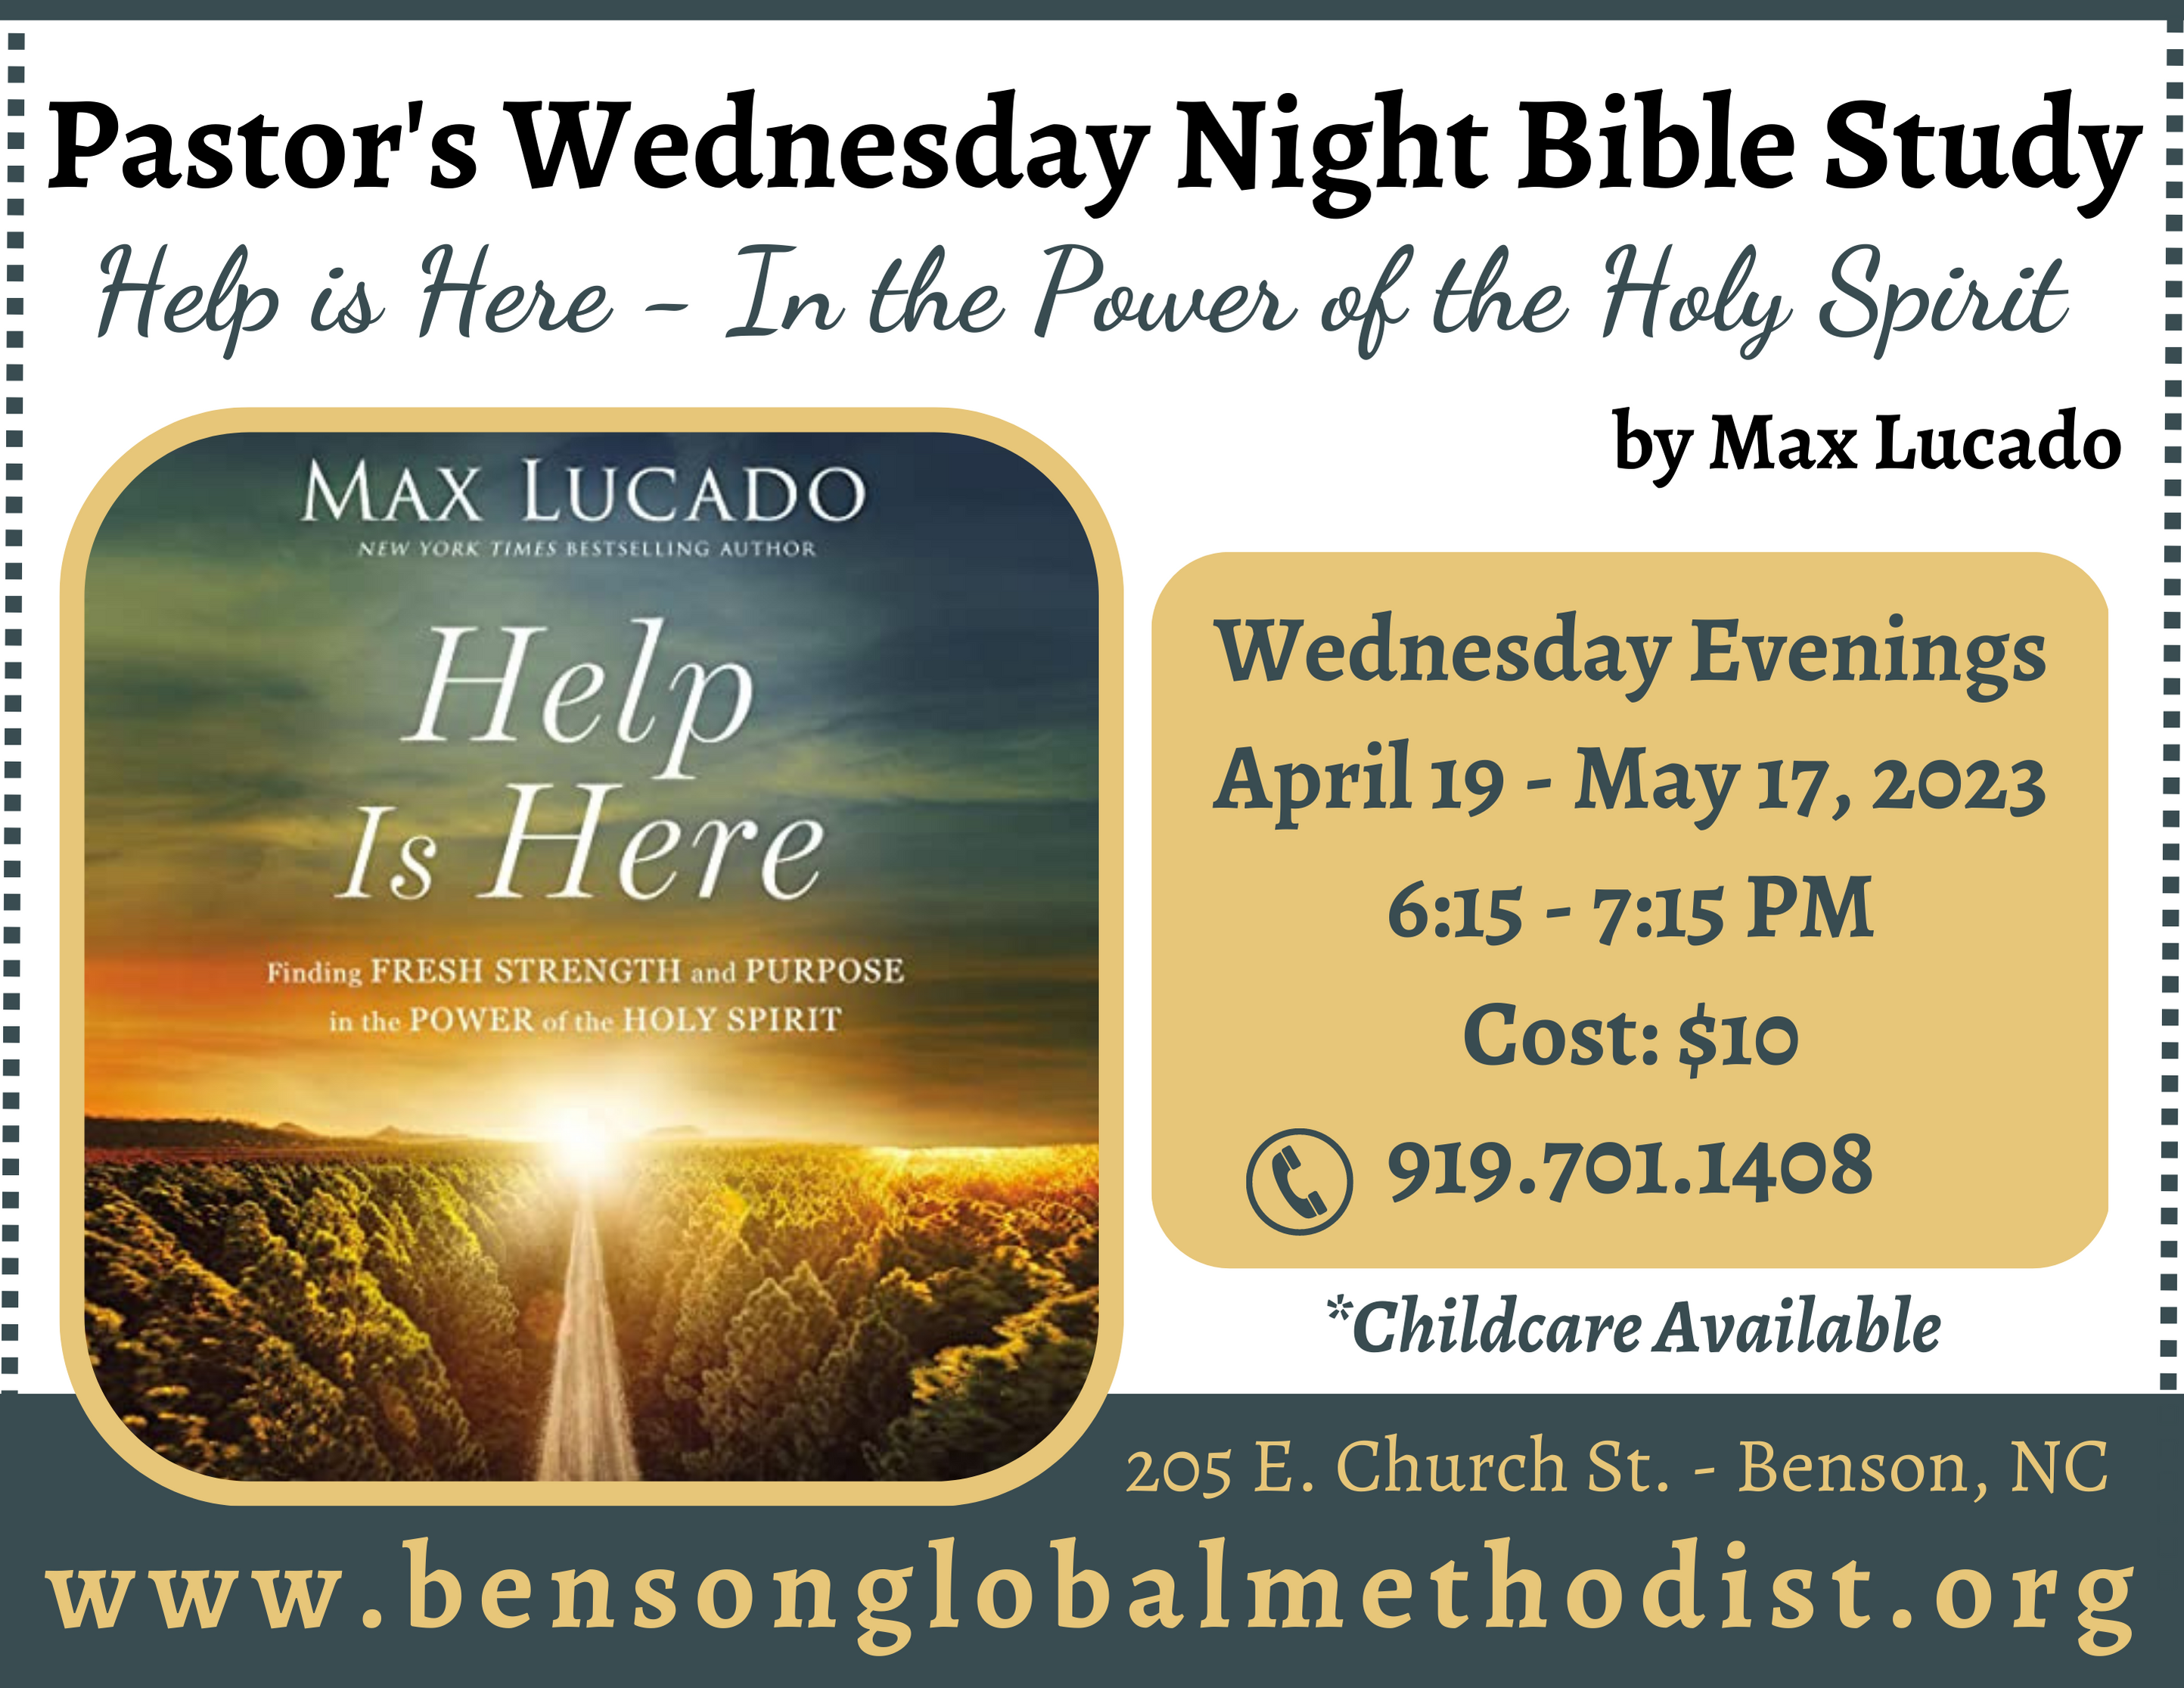 Pastor’s Bible Study – “Help is Here” by Max Lucado